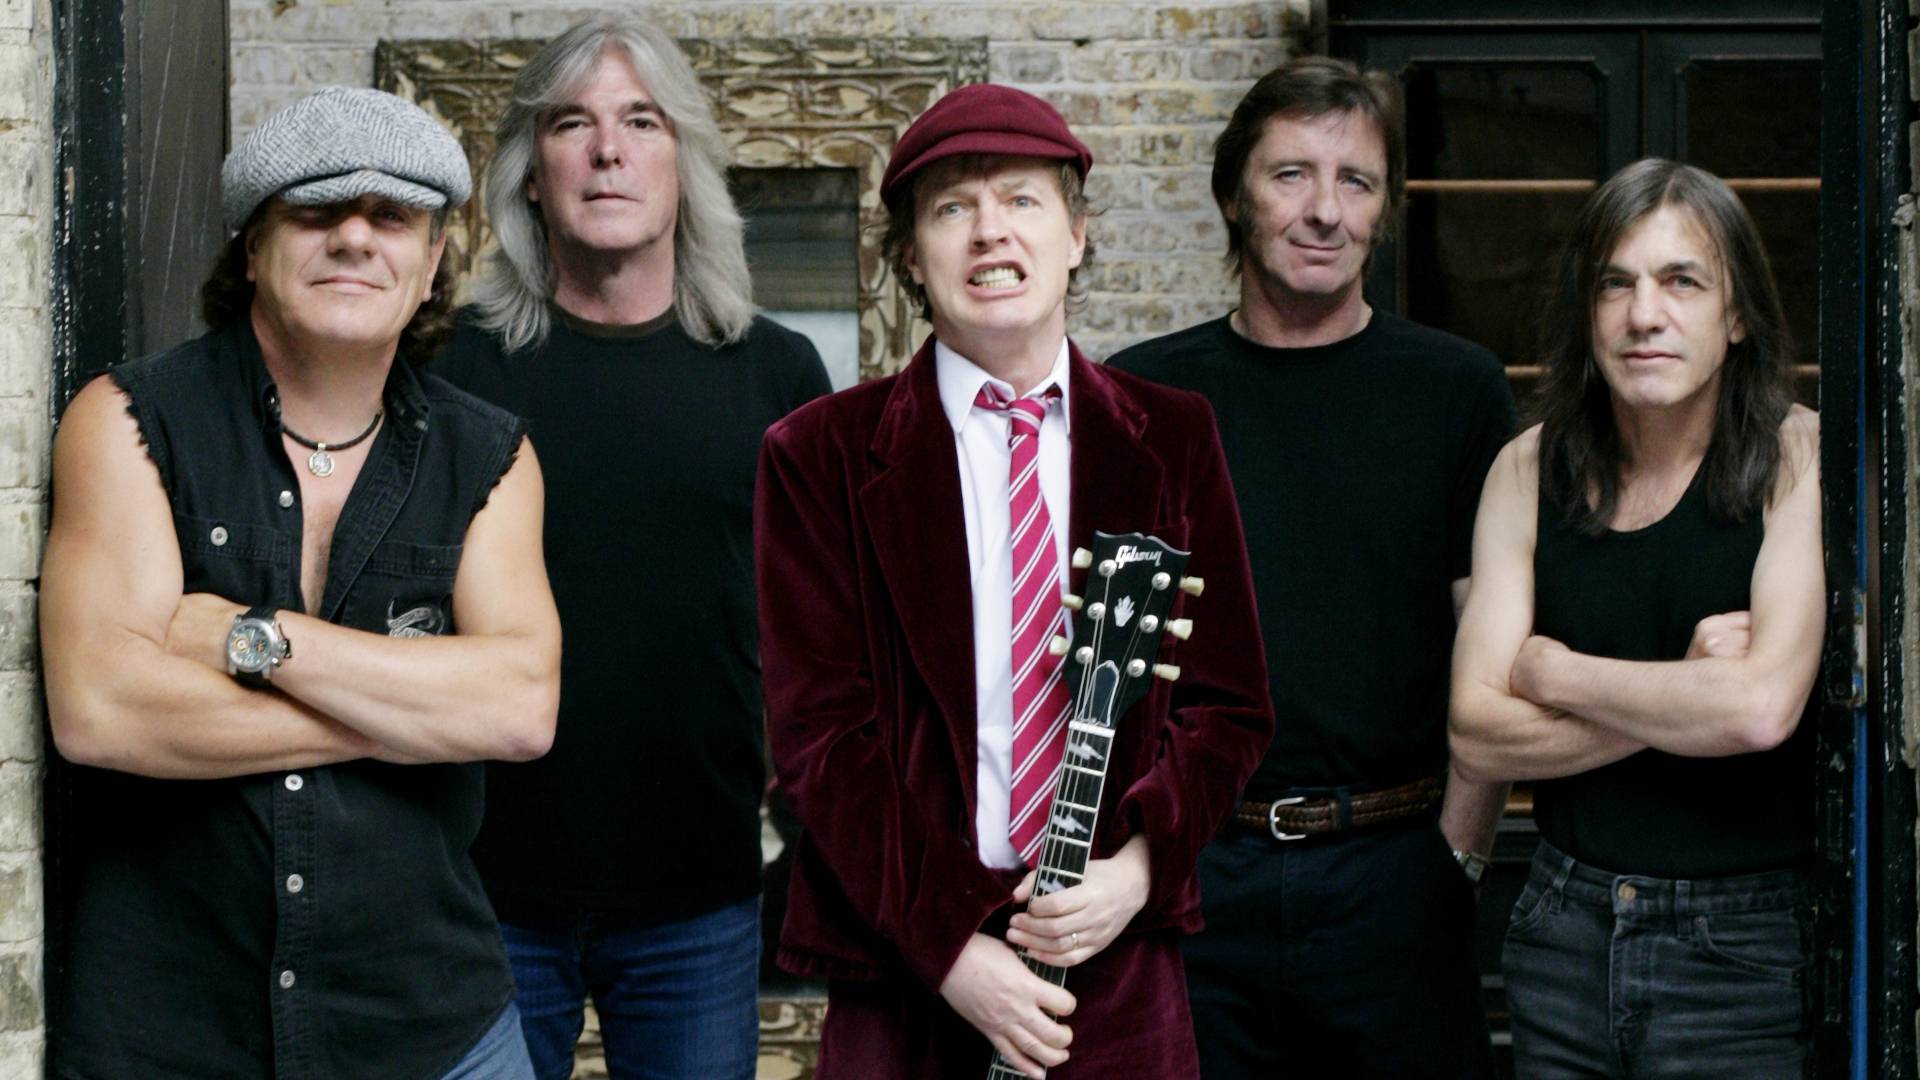 ACDC Wallpaper, ac dc acdc heavy metal hard rock classic bands